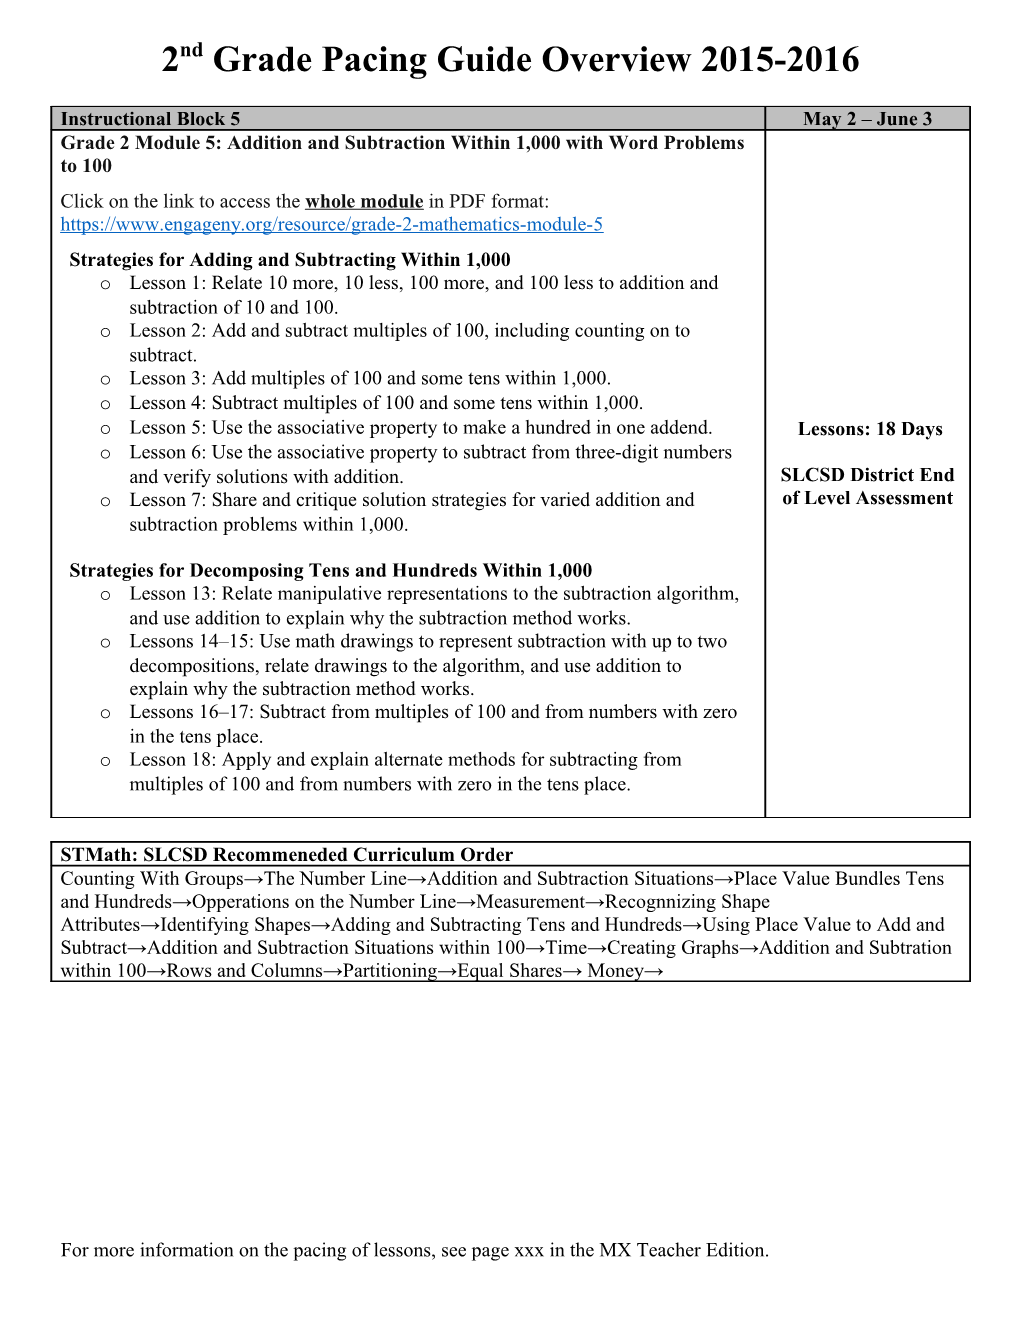 2Nd Grade Pacing Guide Overview 2015-2016